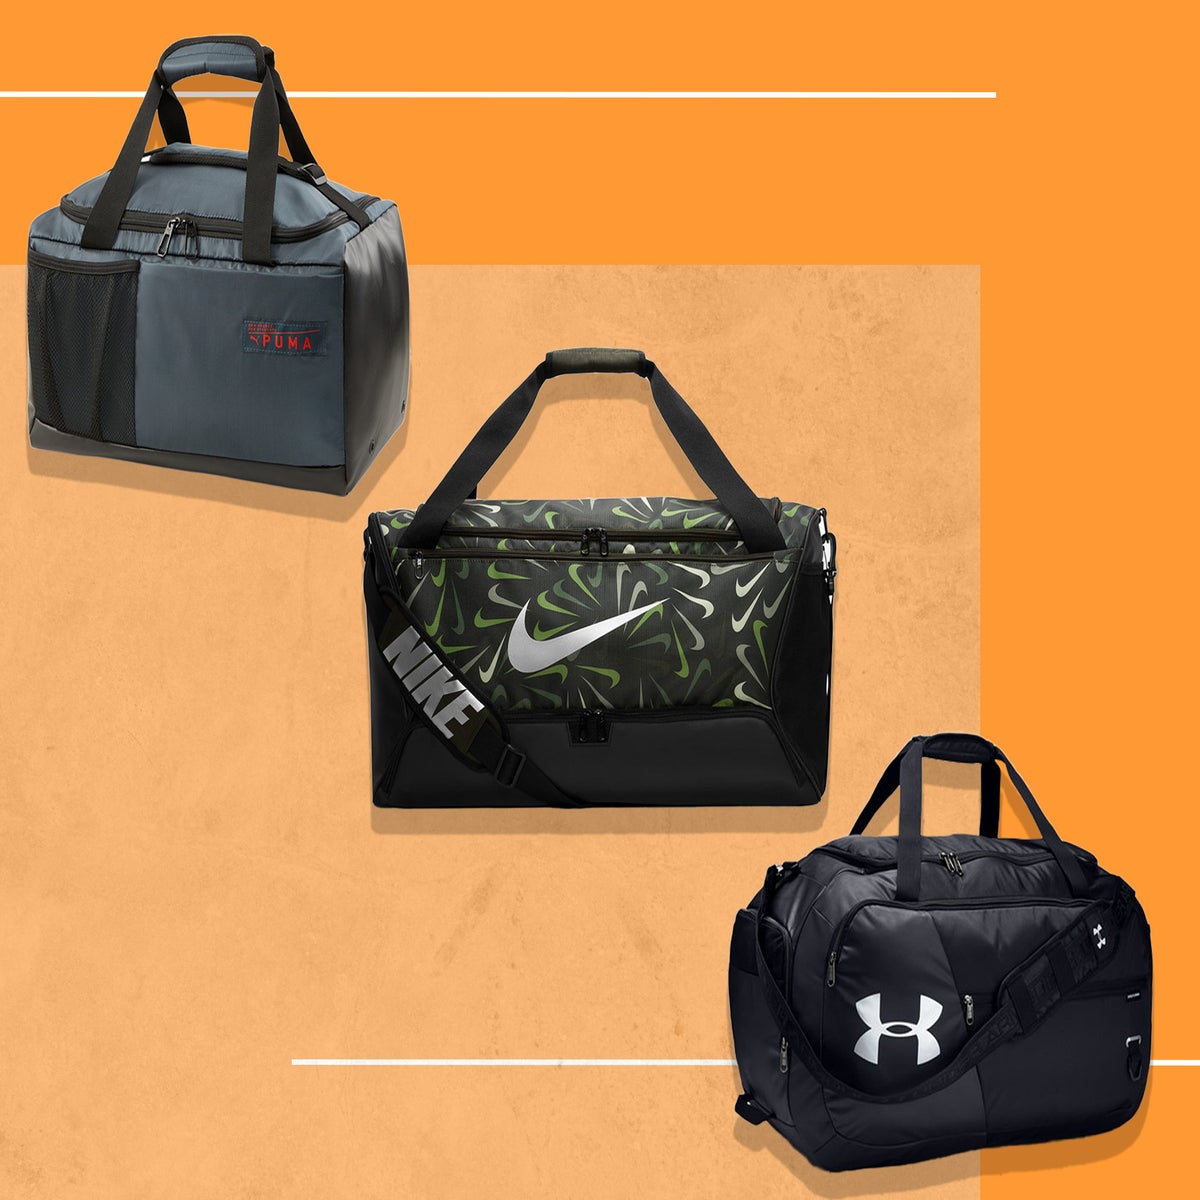 11 Gym Bag Essentials For Her: Never Home Without These